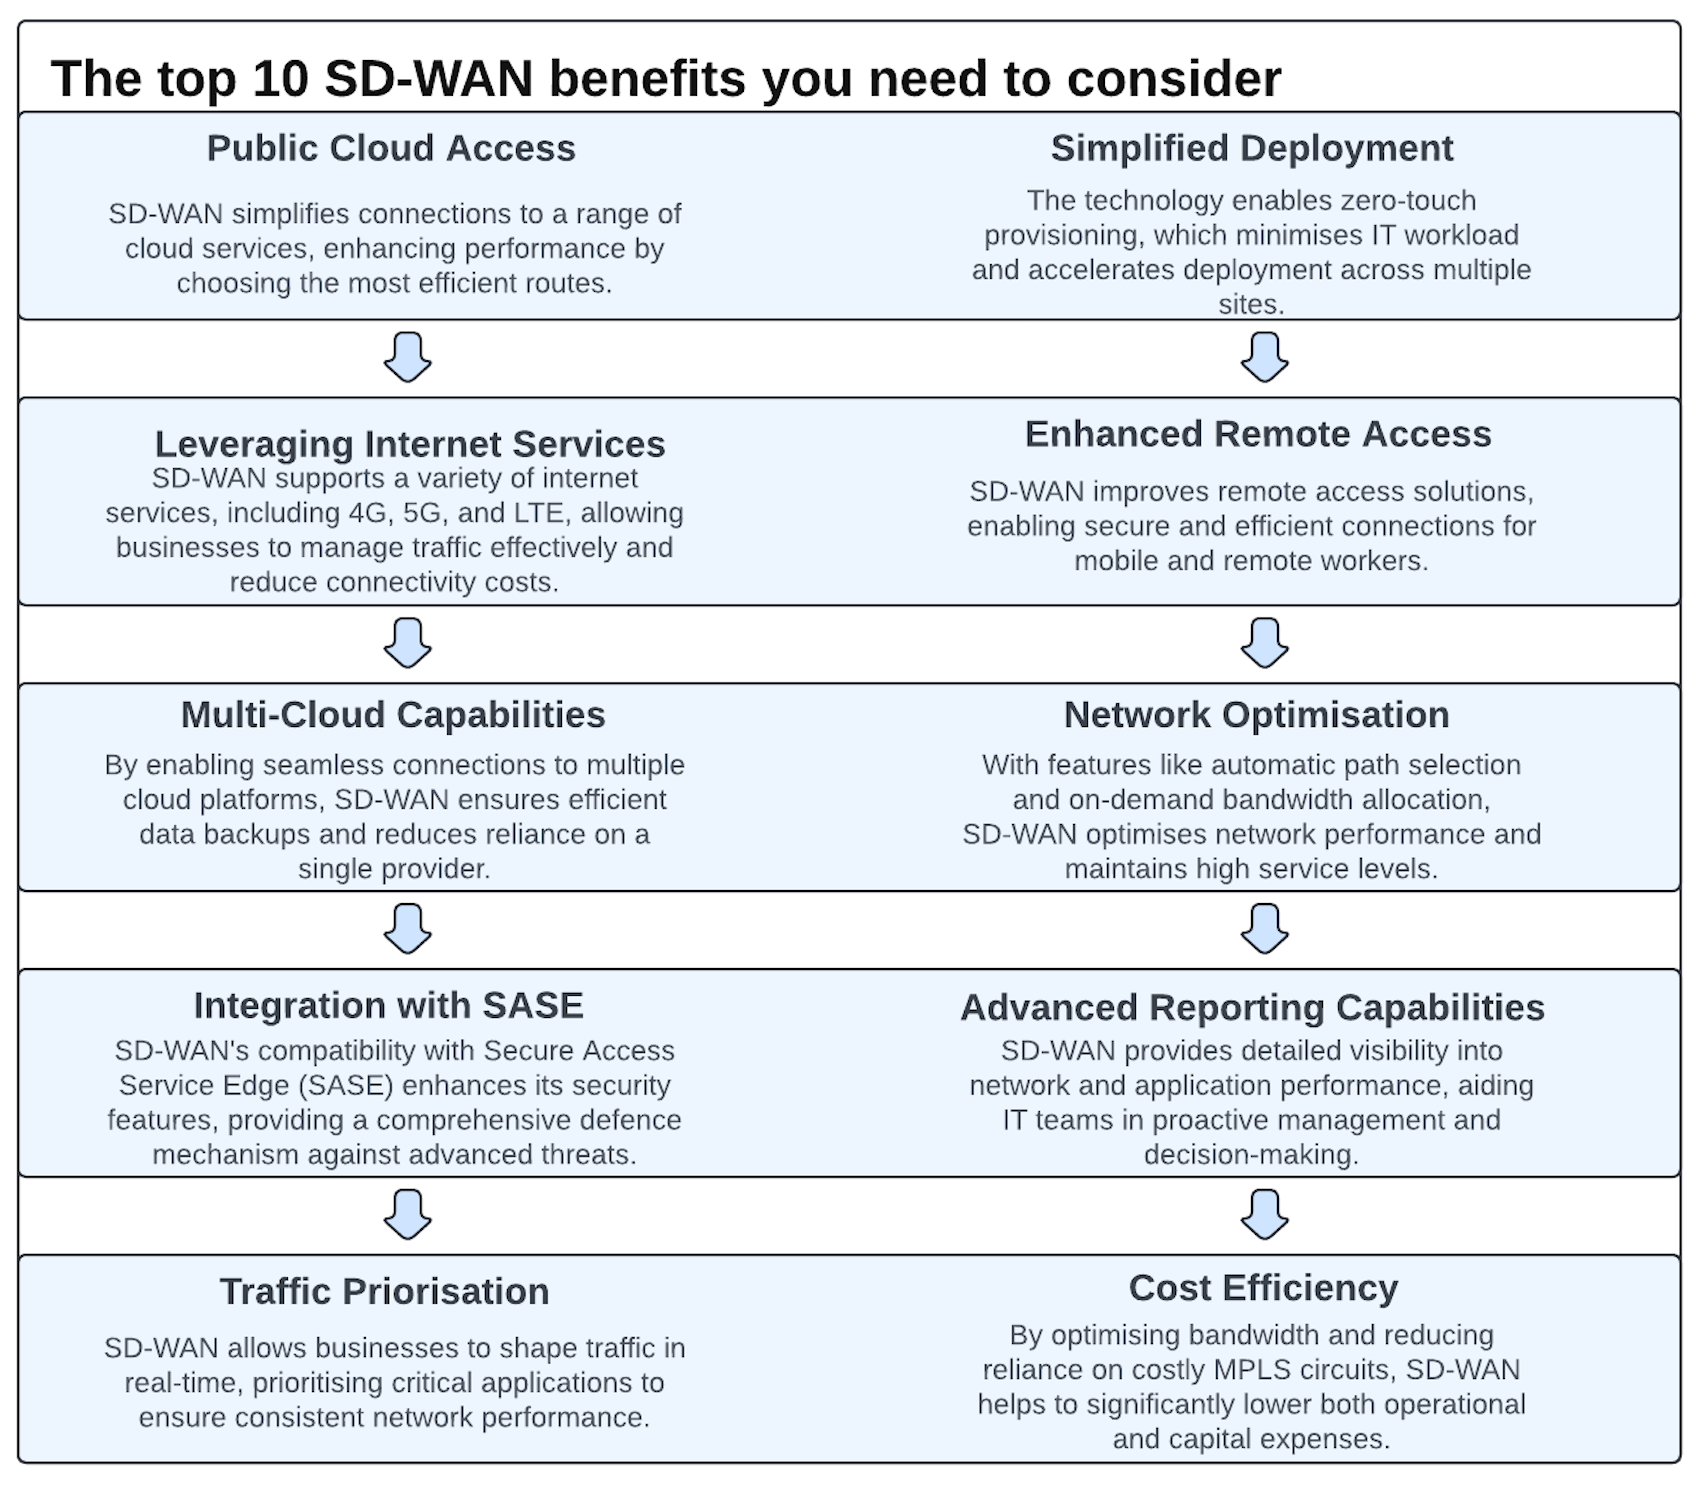 The top 10 SD-WAN benefits you need to consider